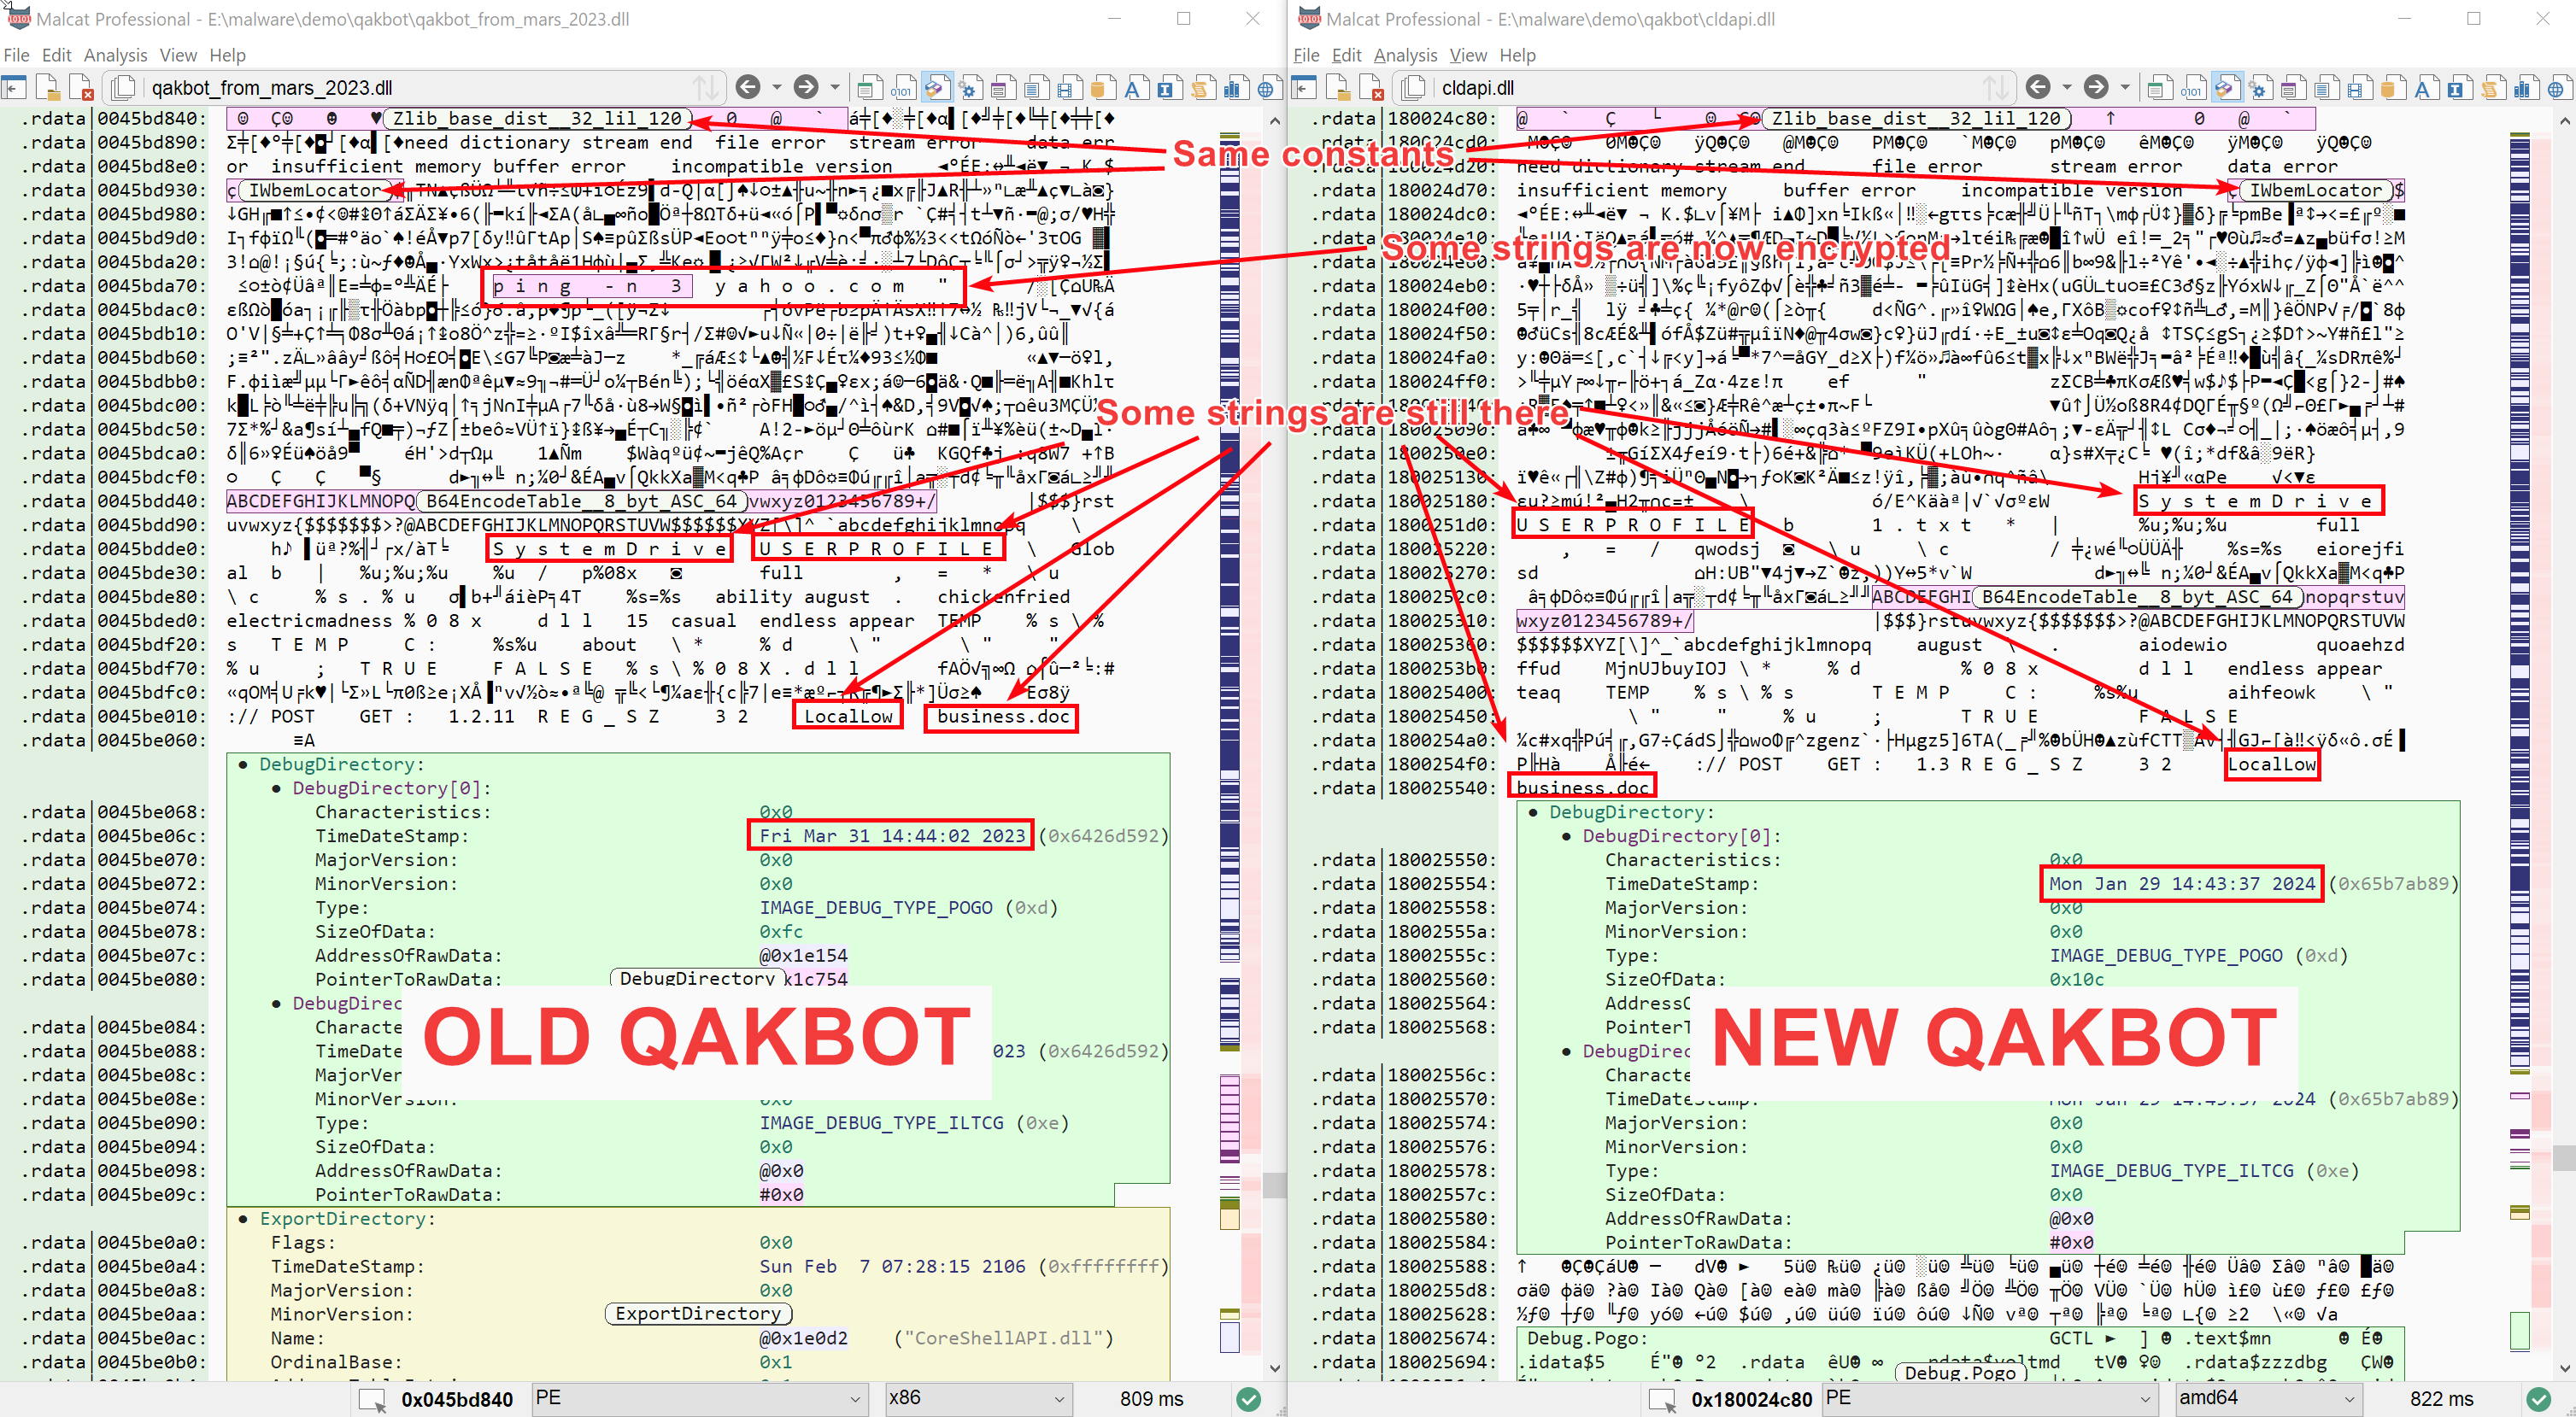 Writing a Qakbot 5.0 config extractor with Malcat